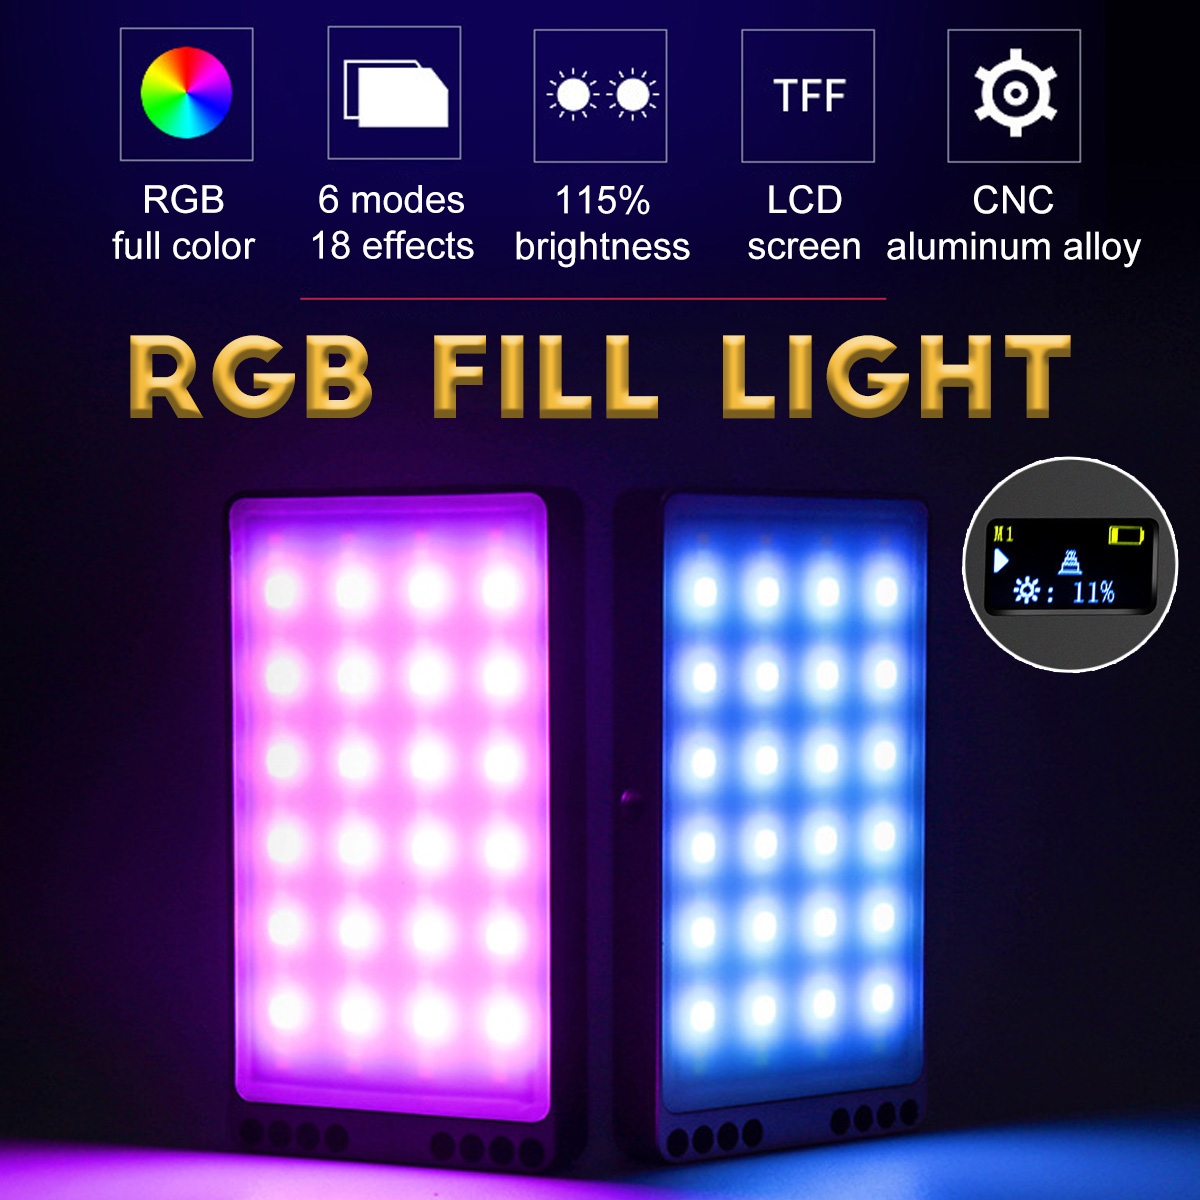 ORSDA-RGB-74-Dimmable-RGB-Fill-Light-2500-9000K-Video-Lighting-Camera-Lamp-for-Photography-Live-Broa-1936730-1